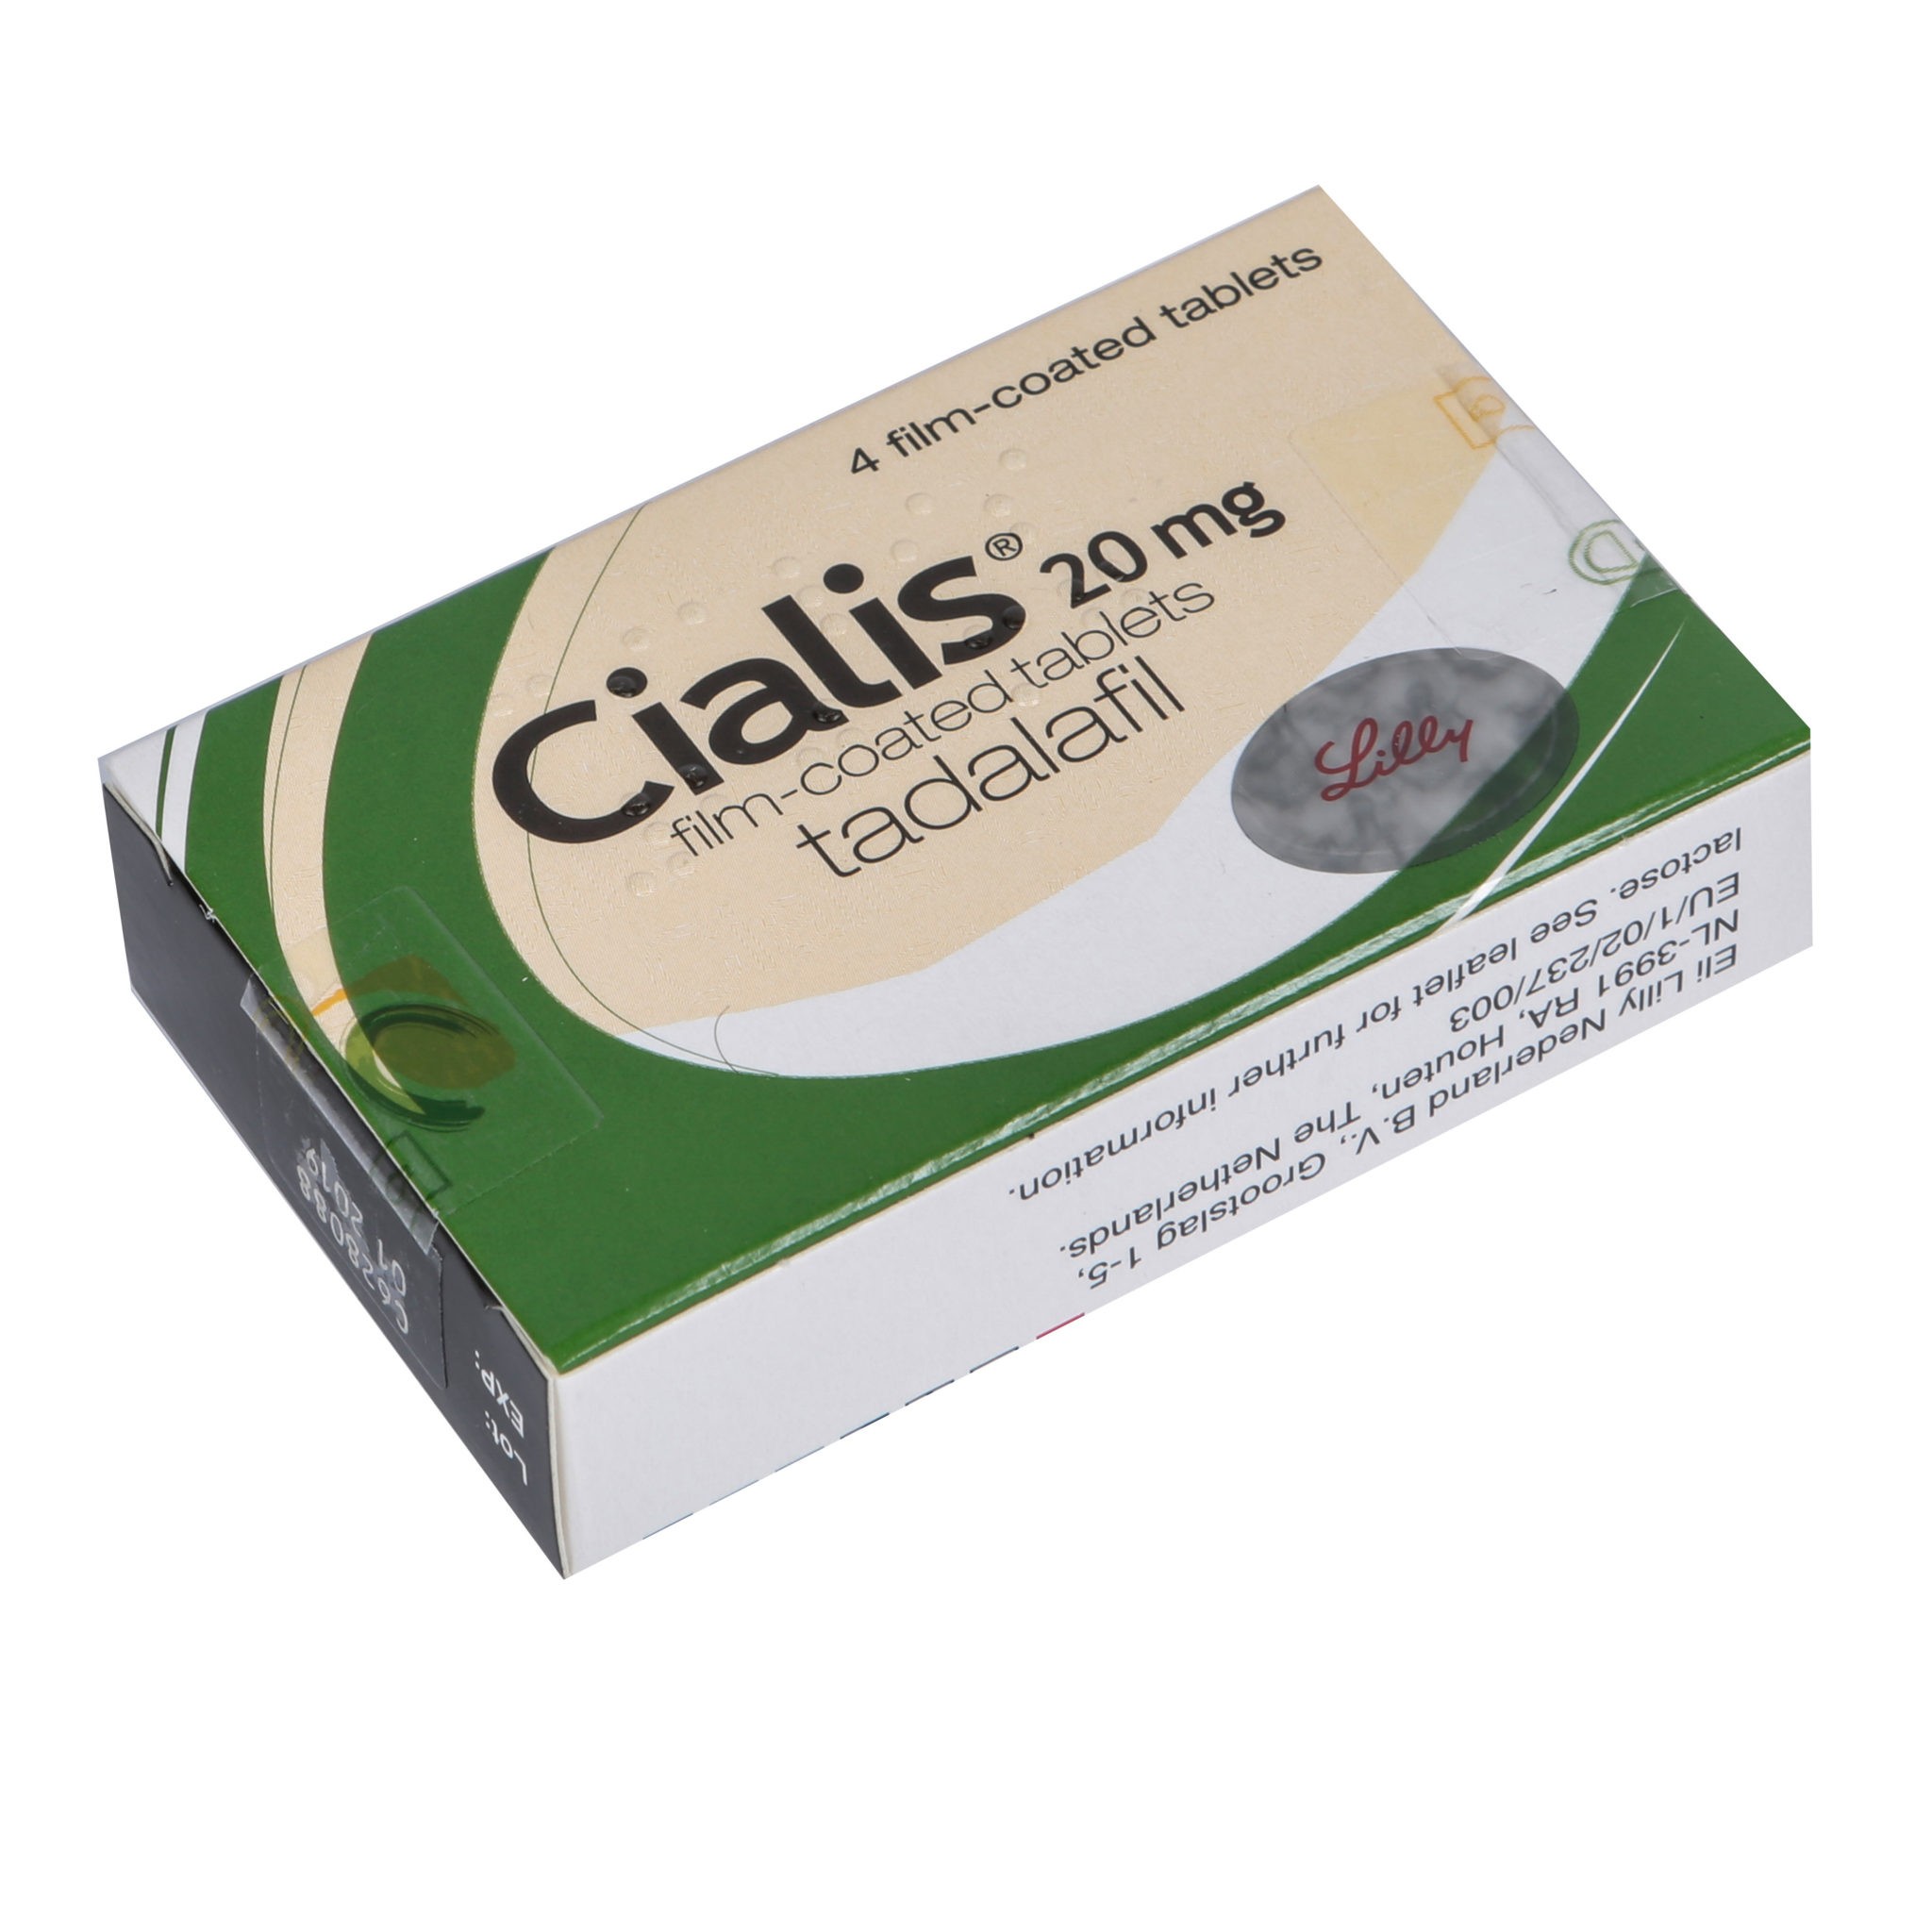 Cialis 20mg Tablets (20 Tablets)